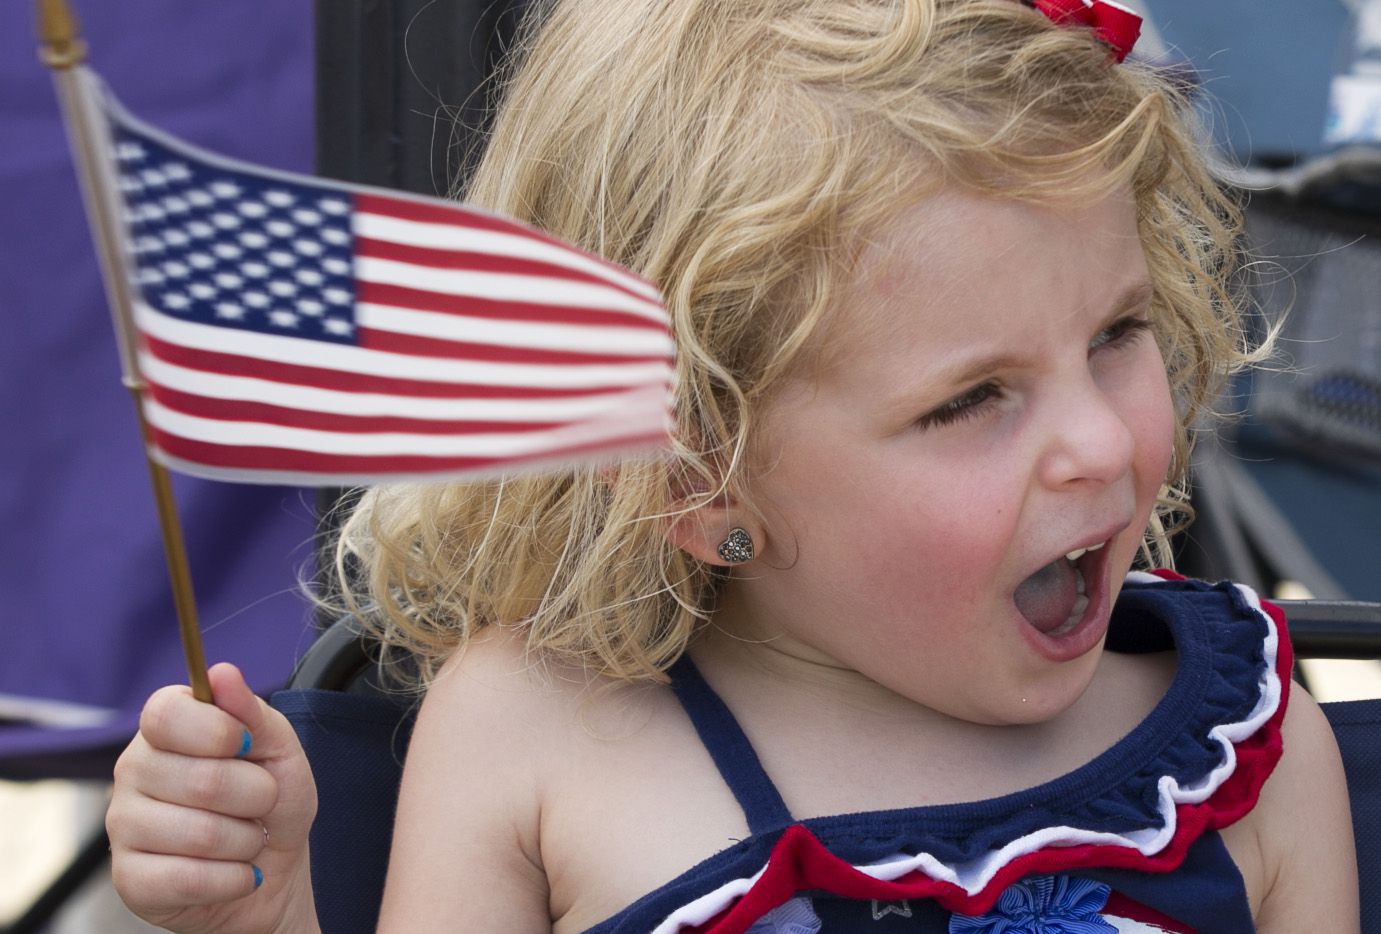 Katie Shearer, 4, of Arlington waves her flag as she watches the Arlington Fourth of July...